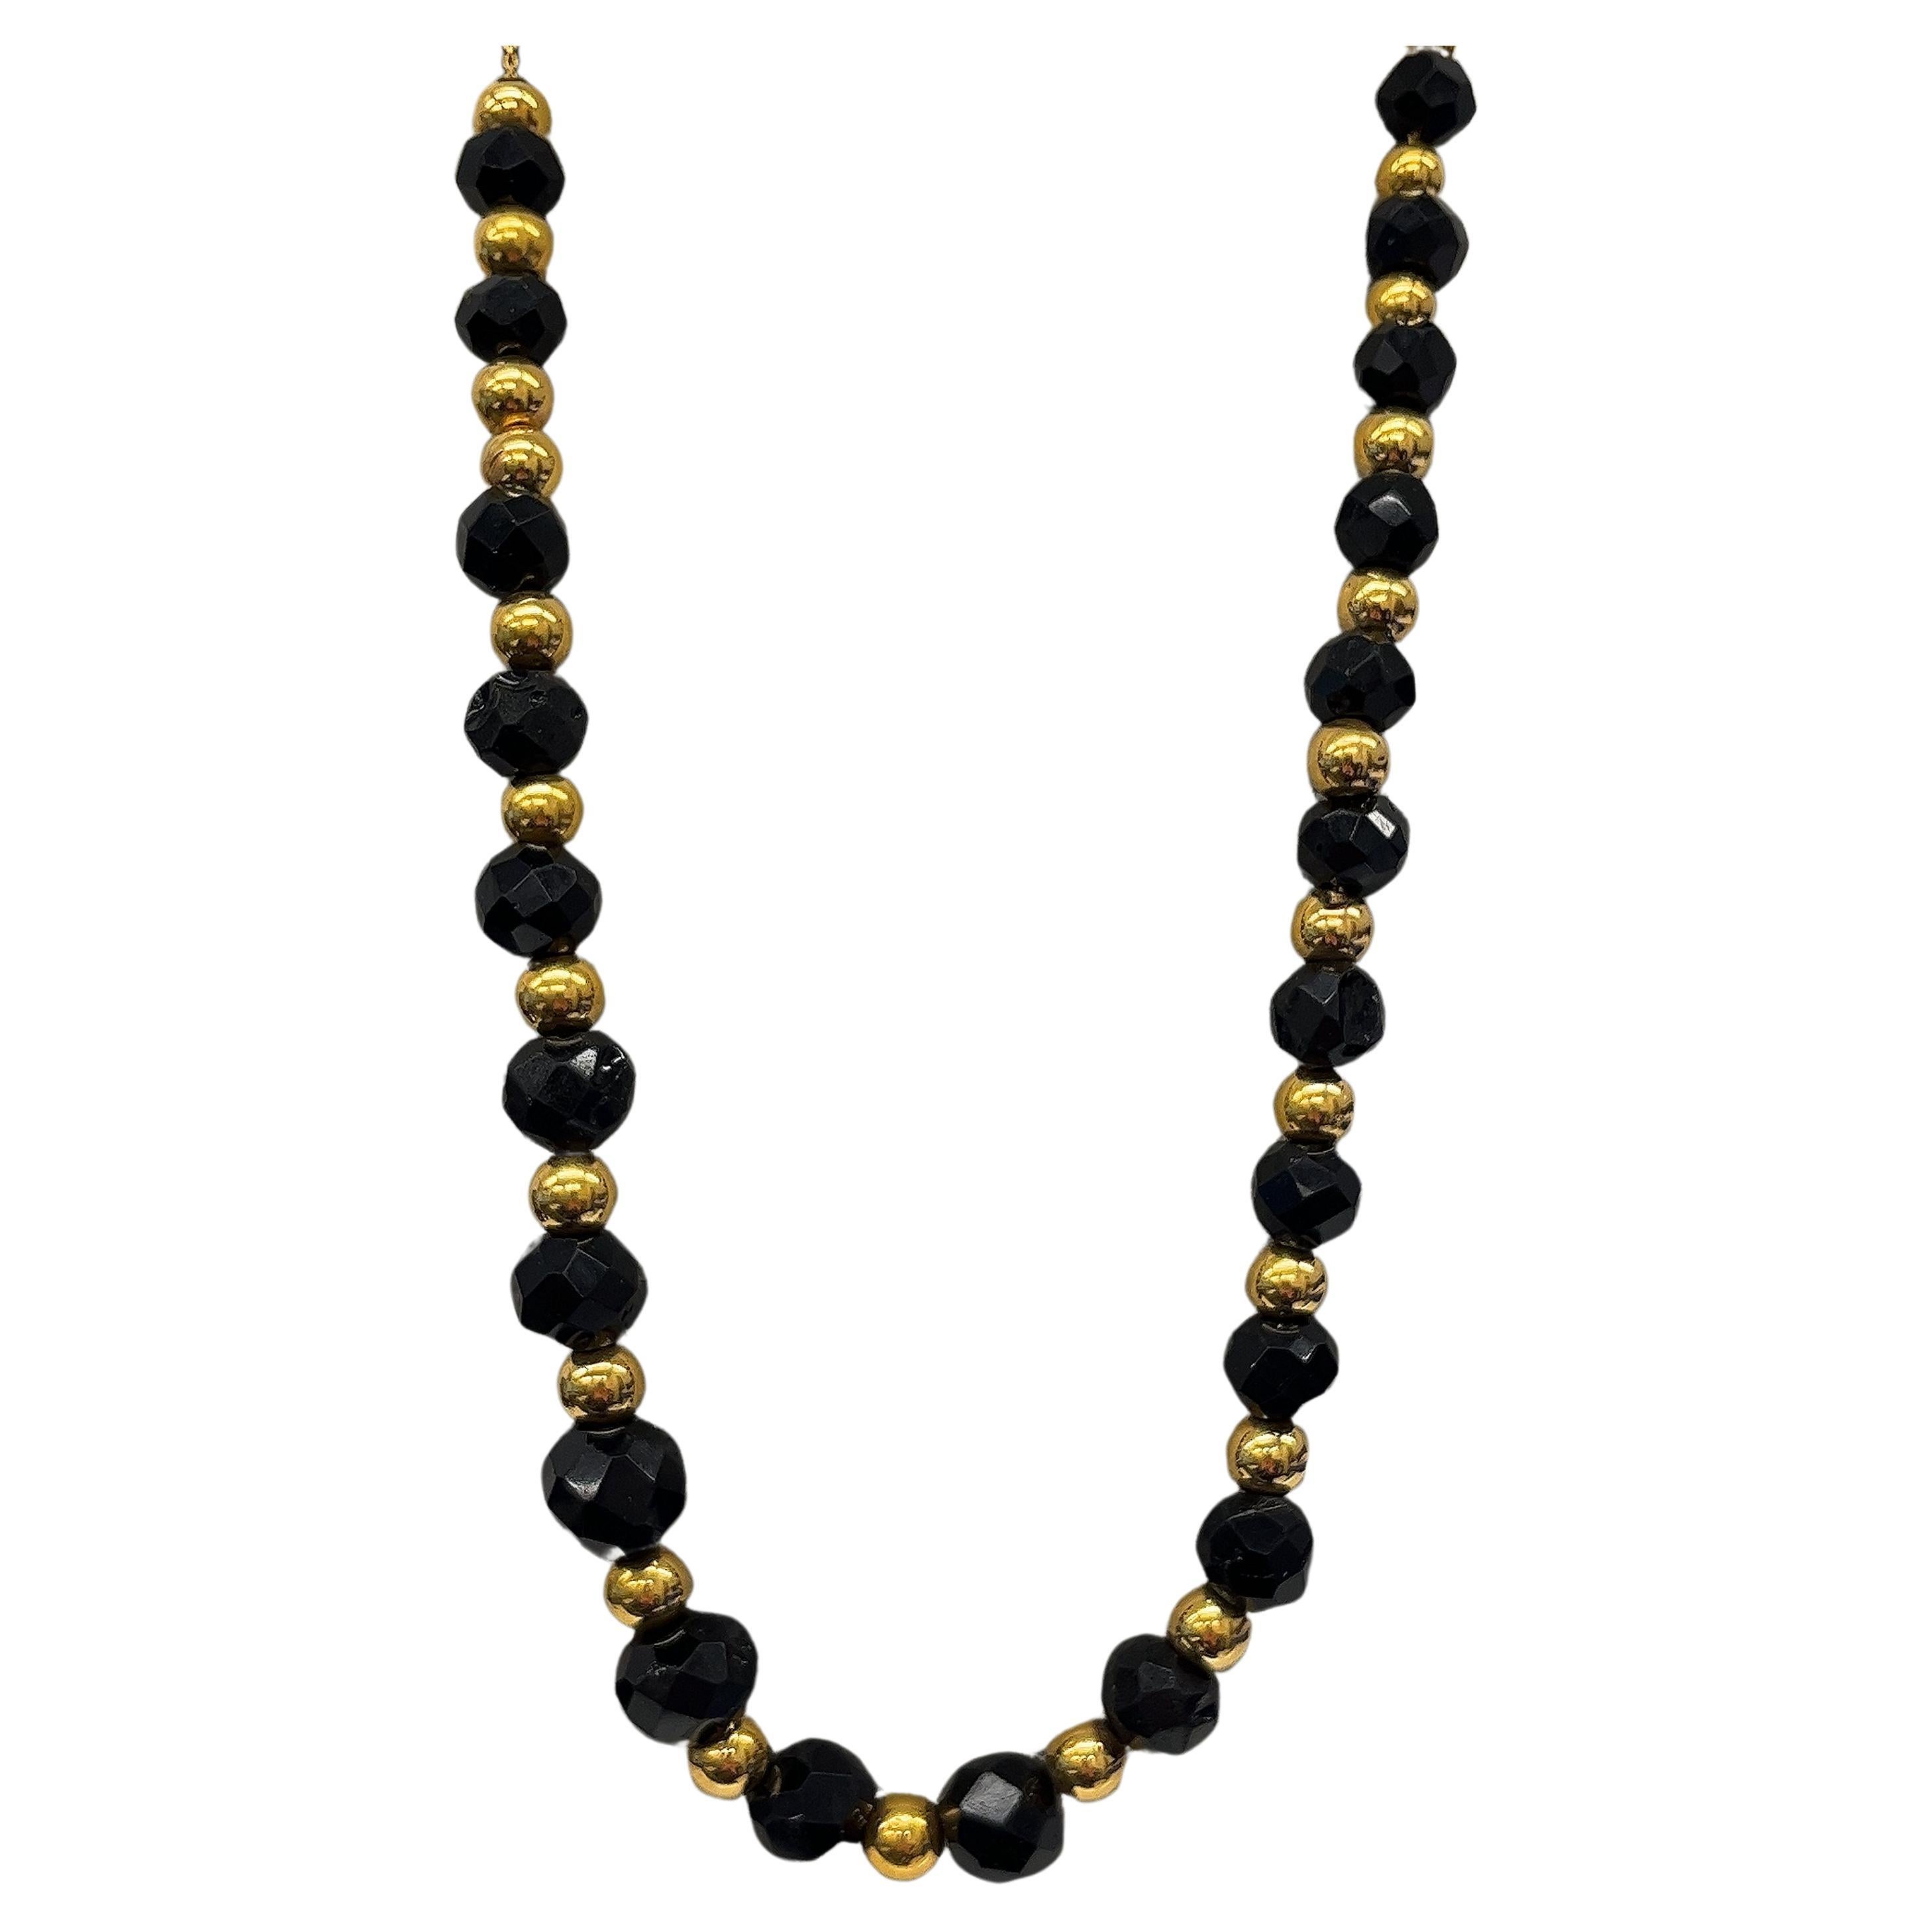 Art Deco Whitby Jet Necklace Black Jet and 18ct Yellow Gold Bead Necklace